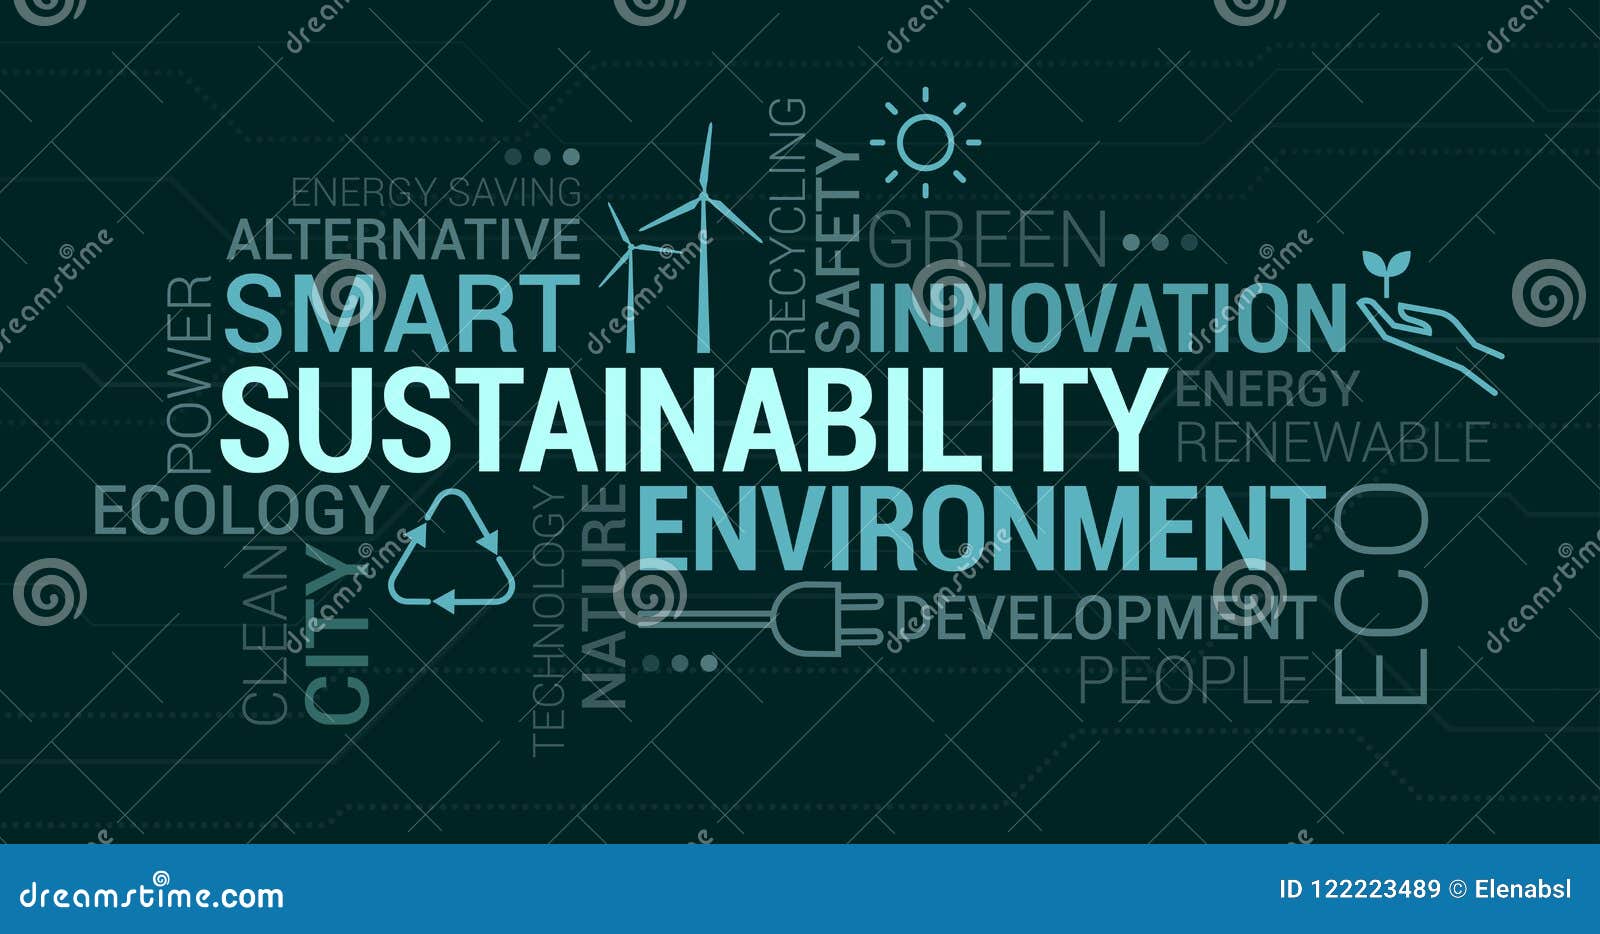 environment, smart cities and sustainability tag cloud